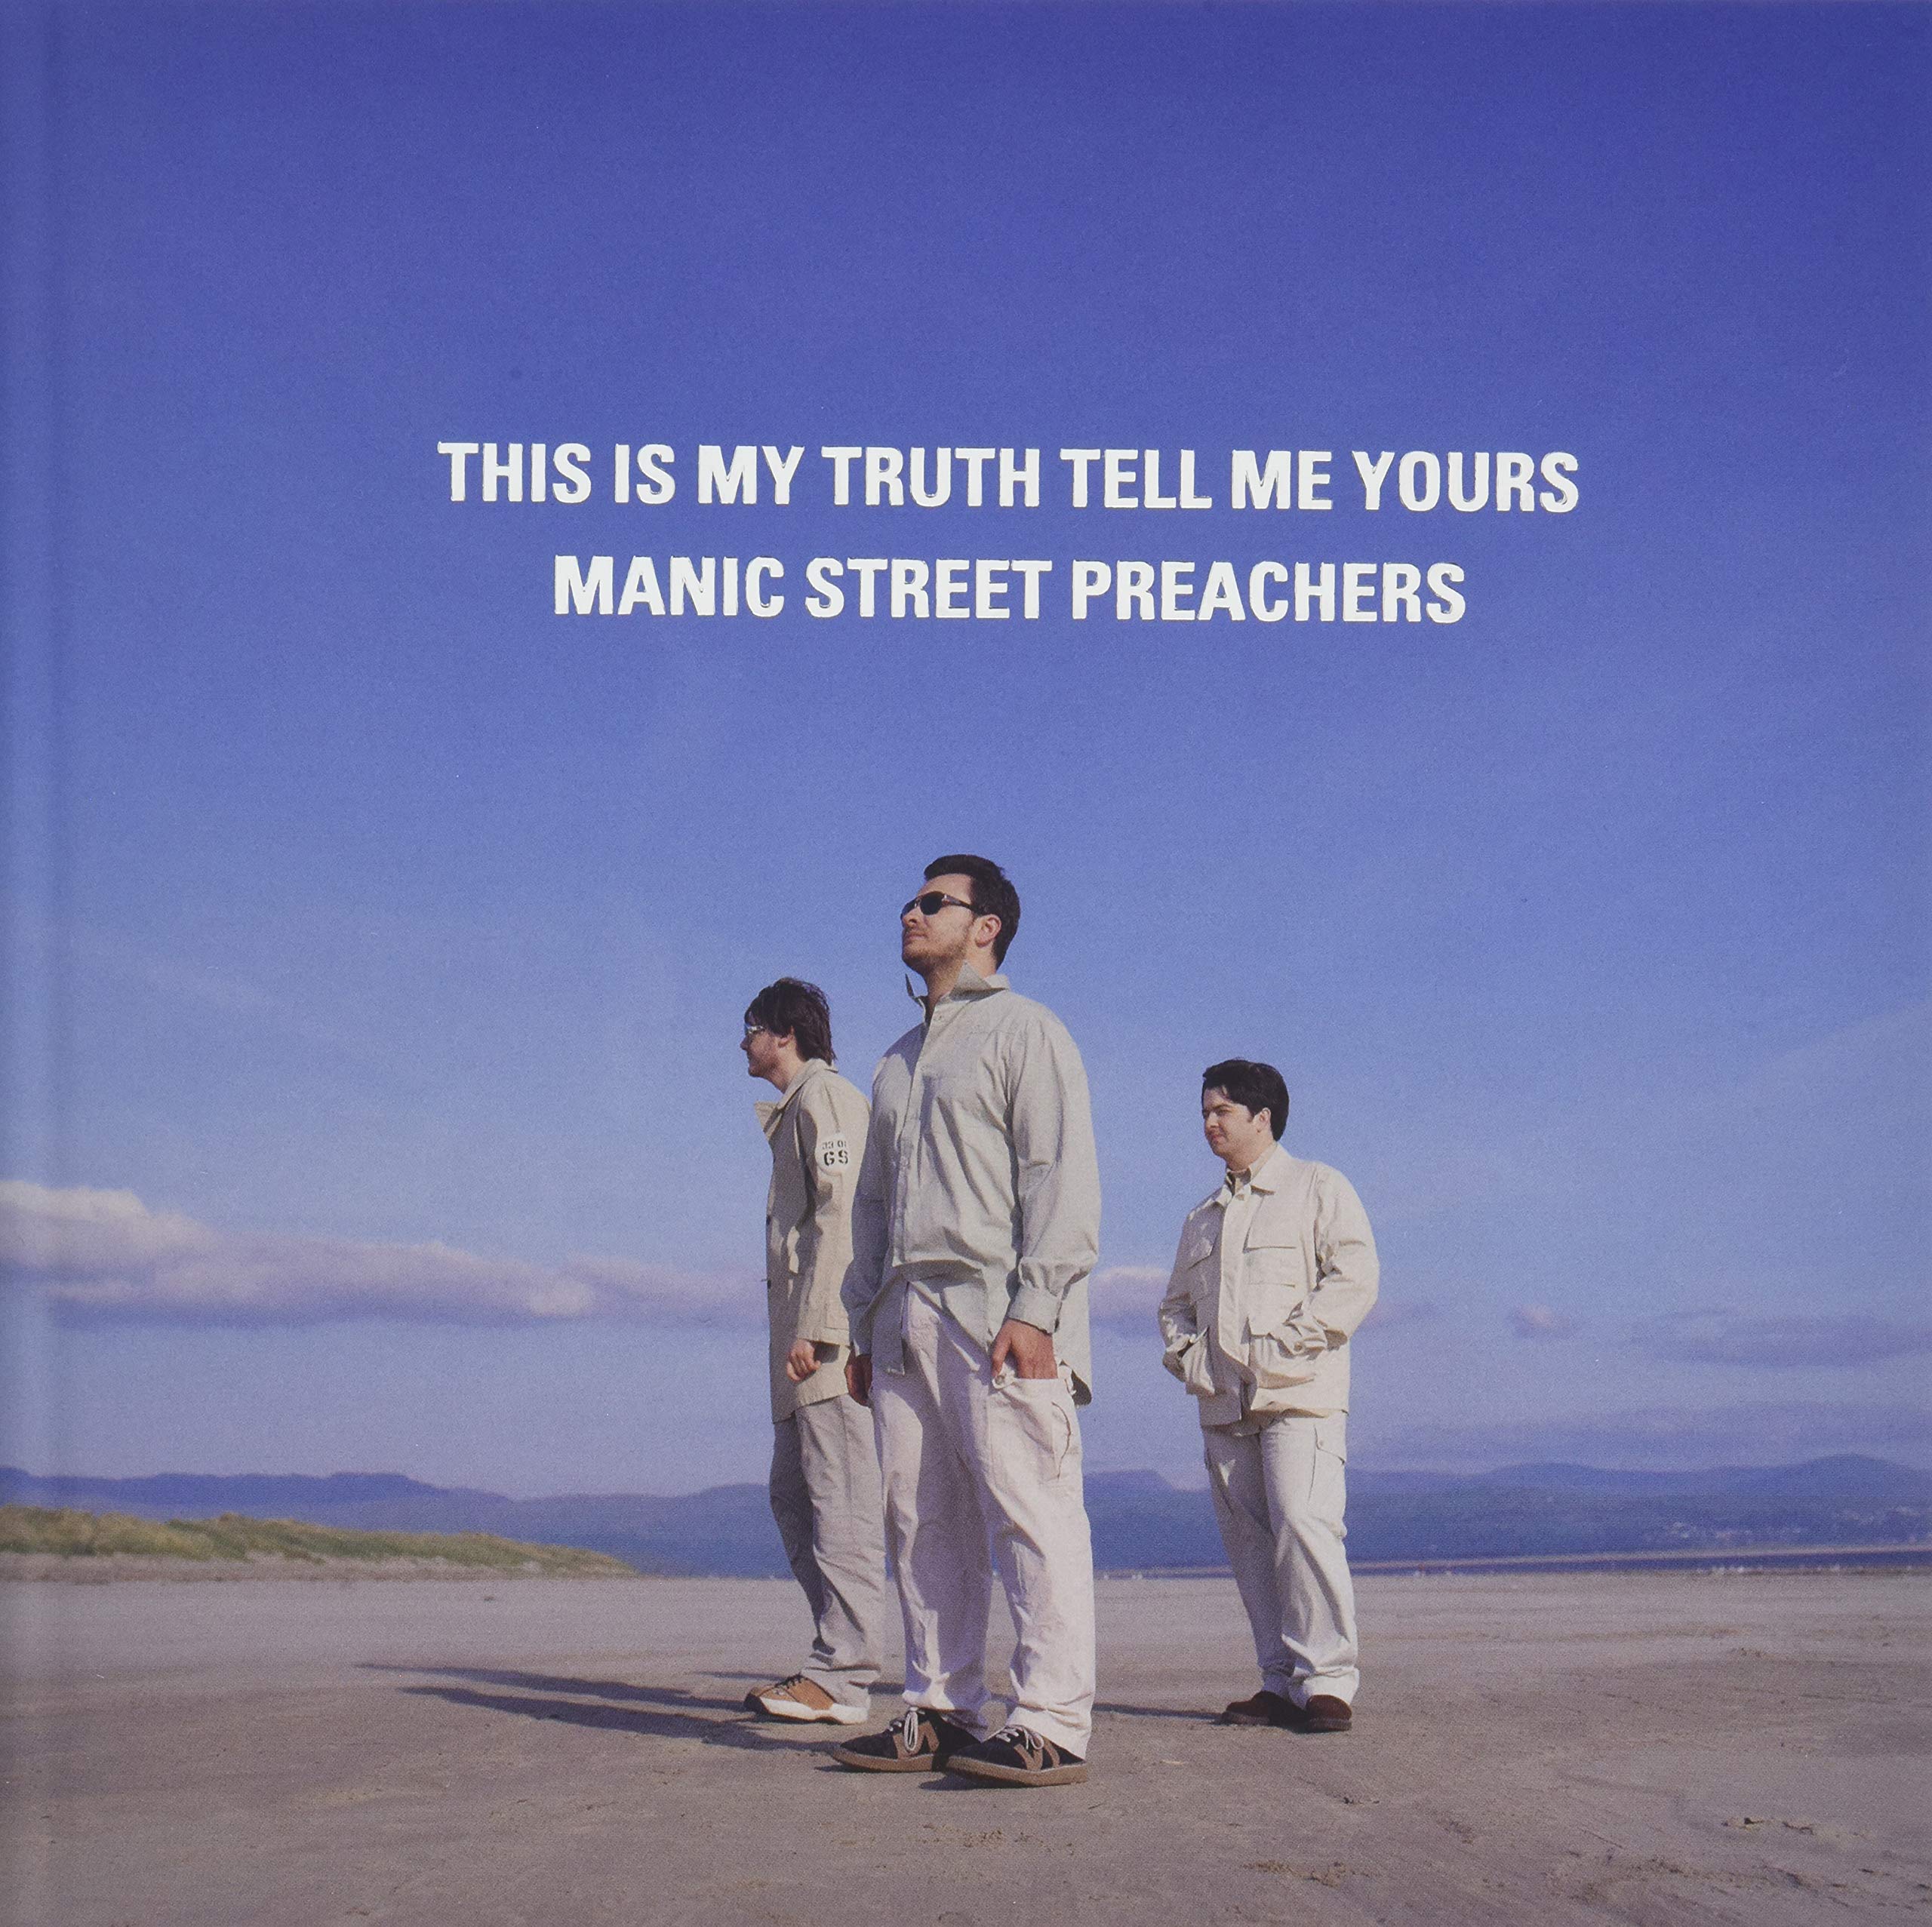 Manic Street Preachers-This Is My Truth Tell Me Yours (20 Year Collectors Edition)-REMASTERED-16BIT-WEB-FLAC-2018-ENRiCH